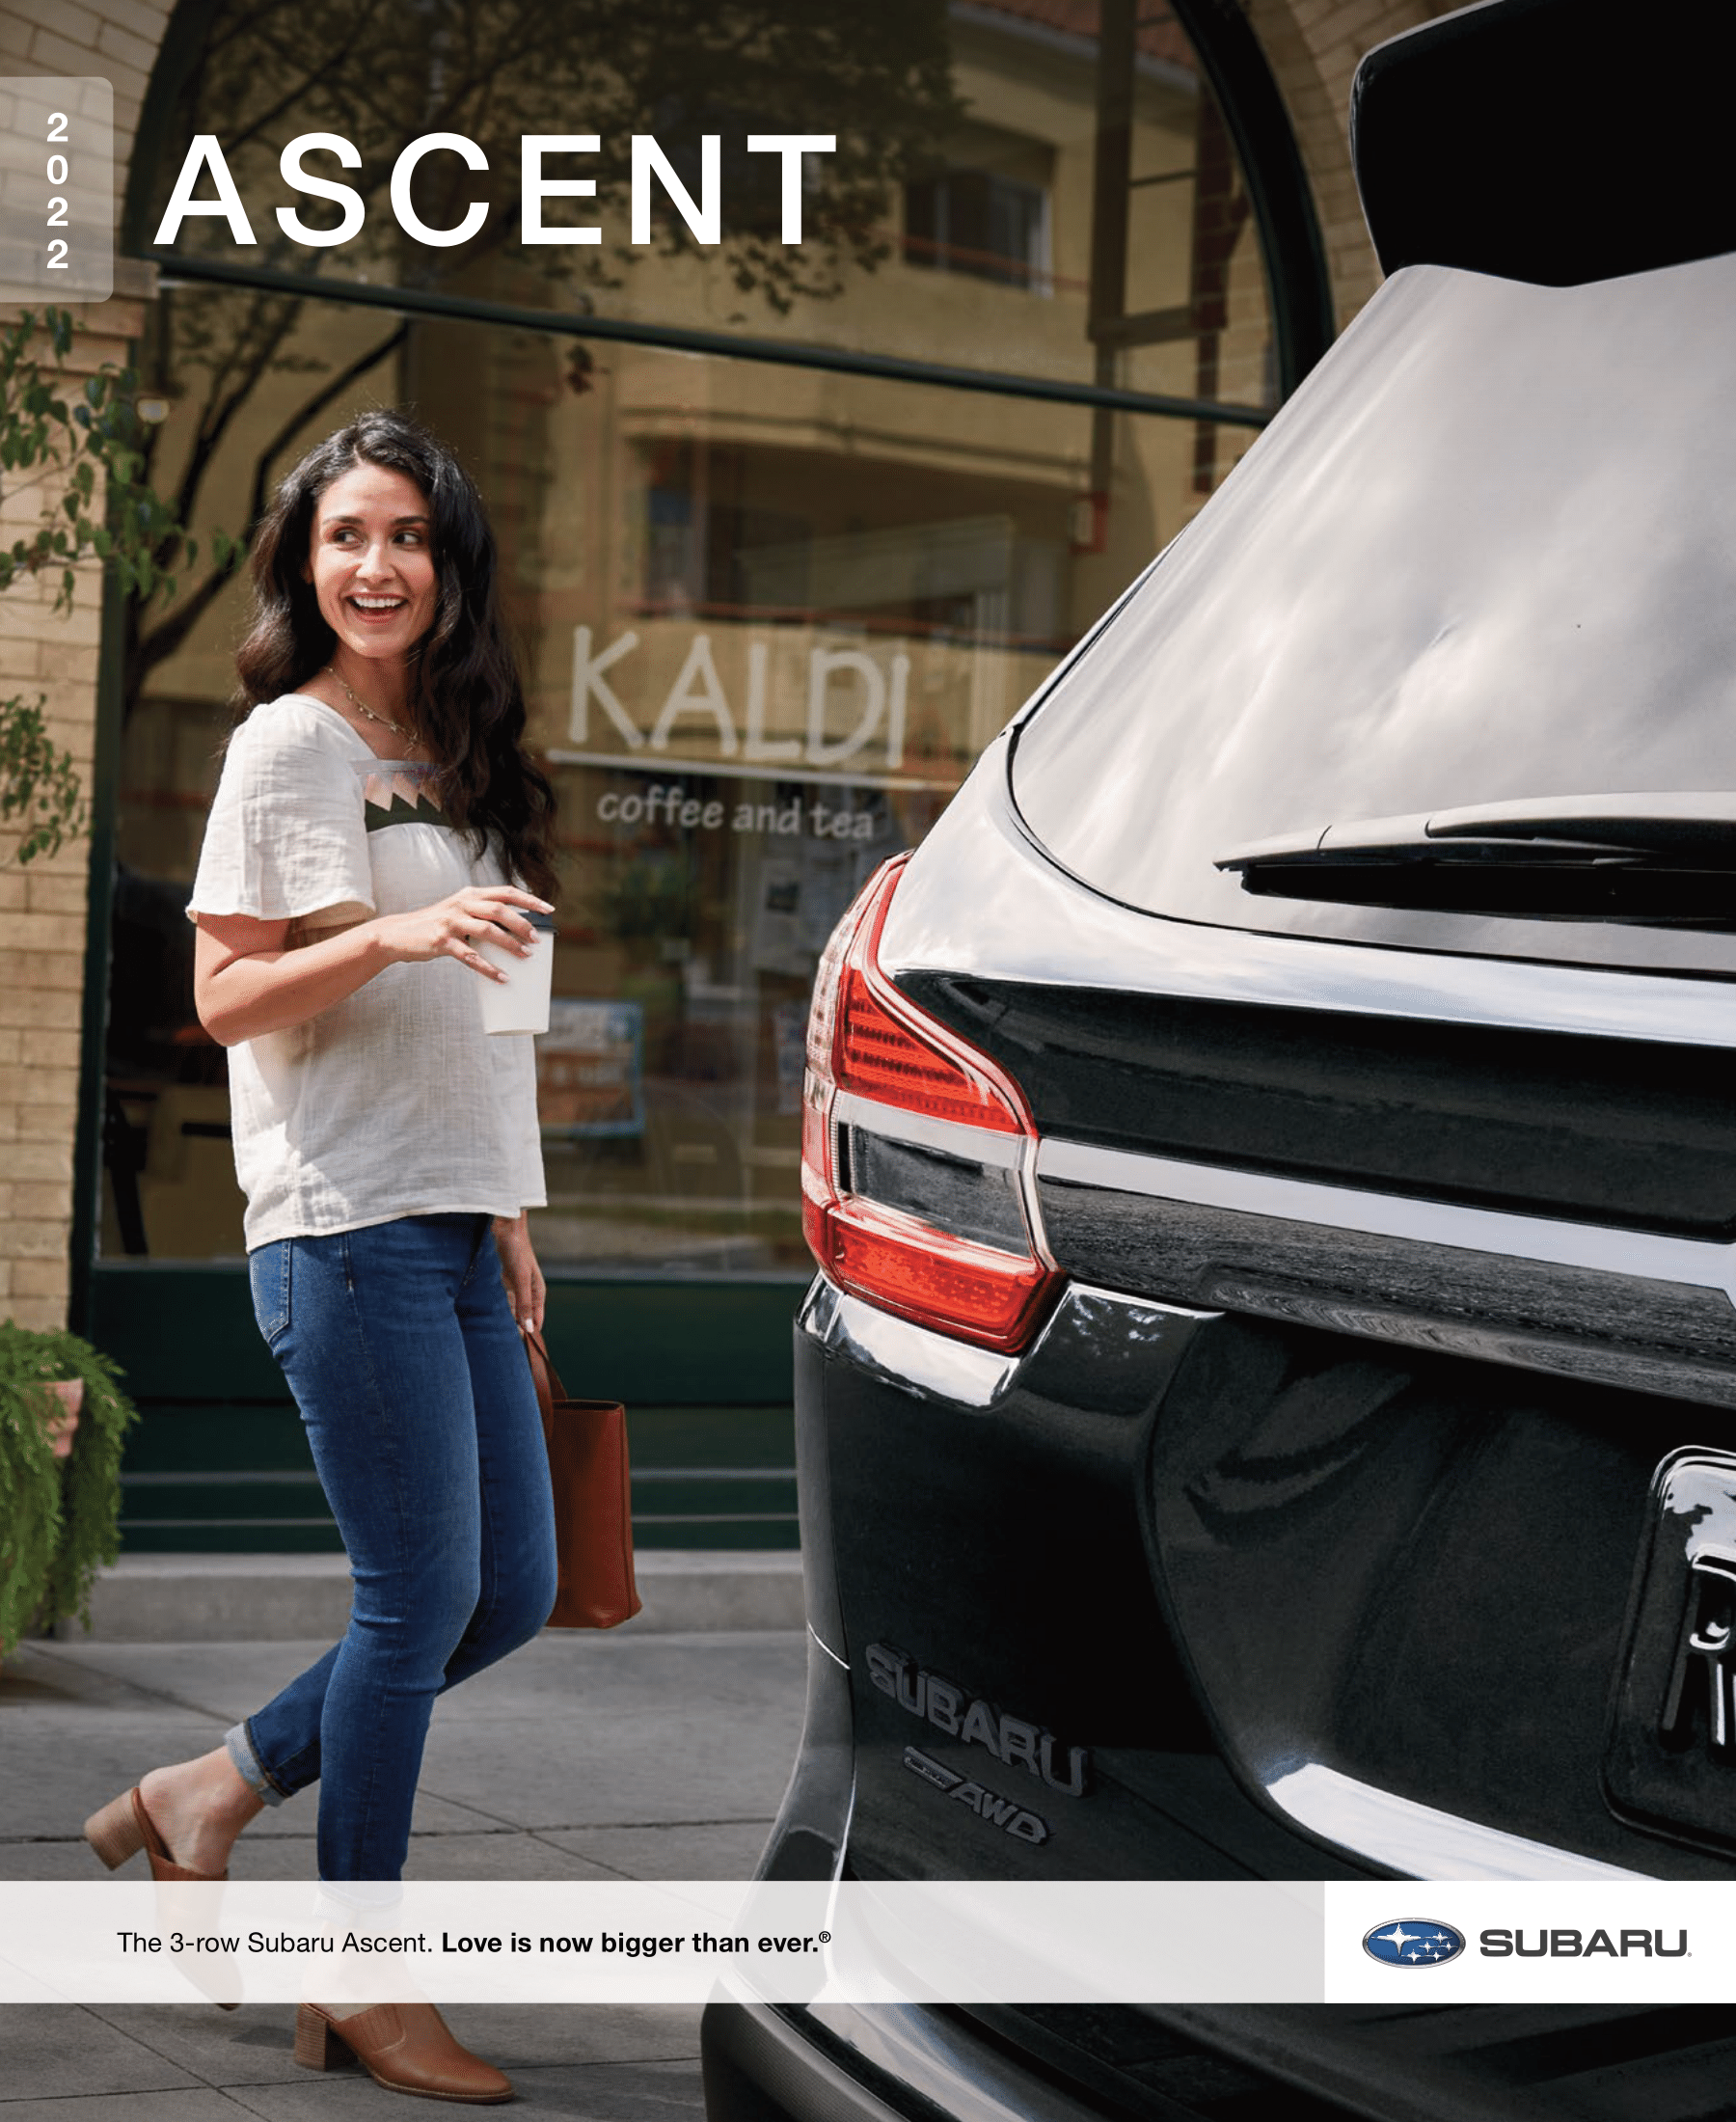 2022 Ascent image with link to brochure.